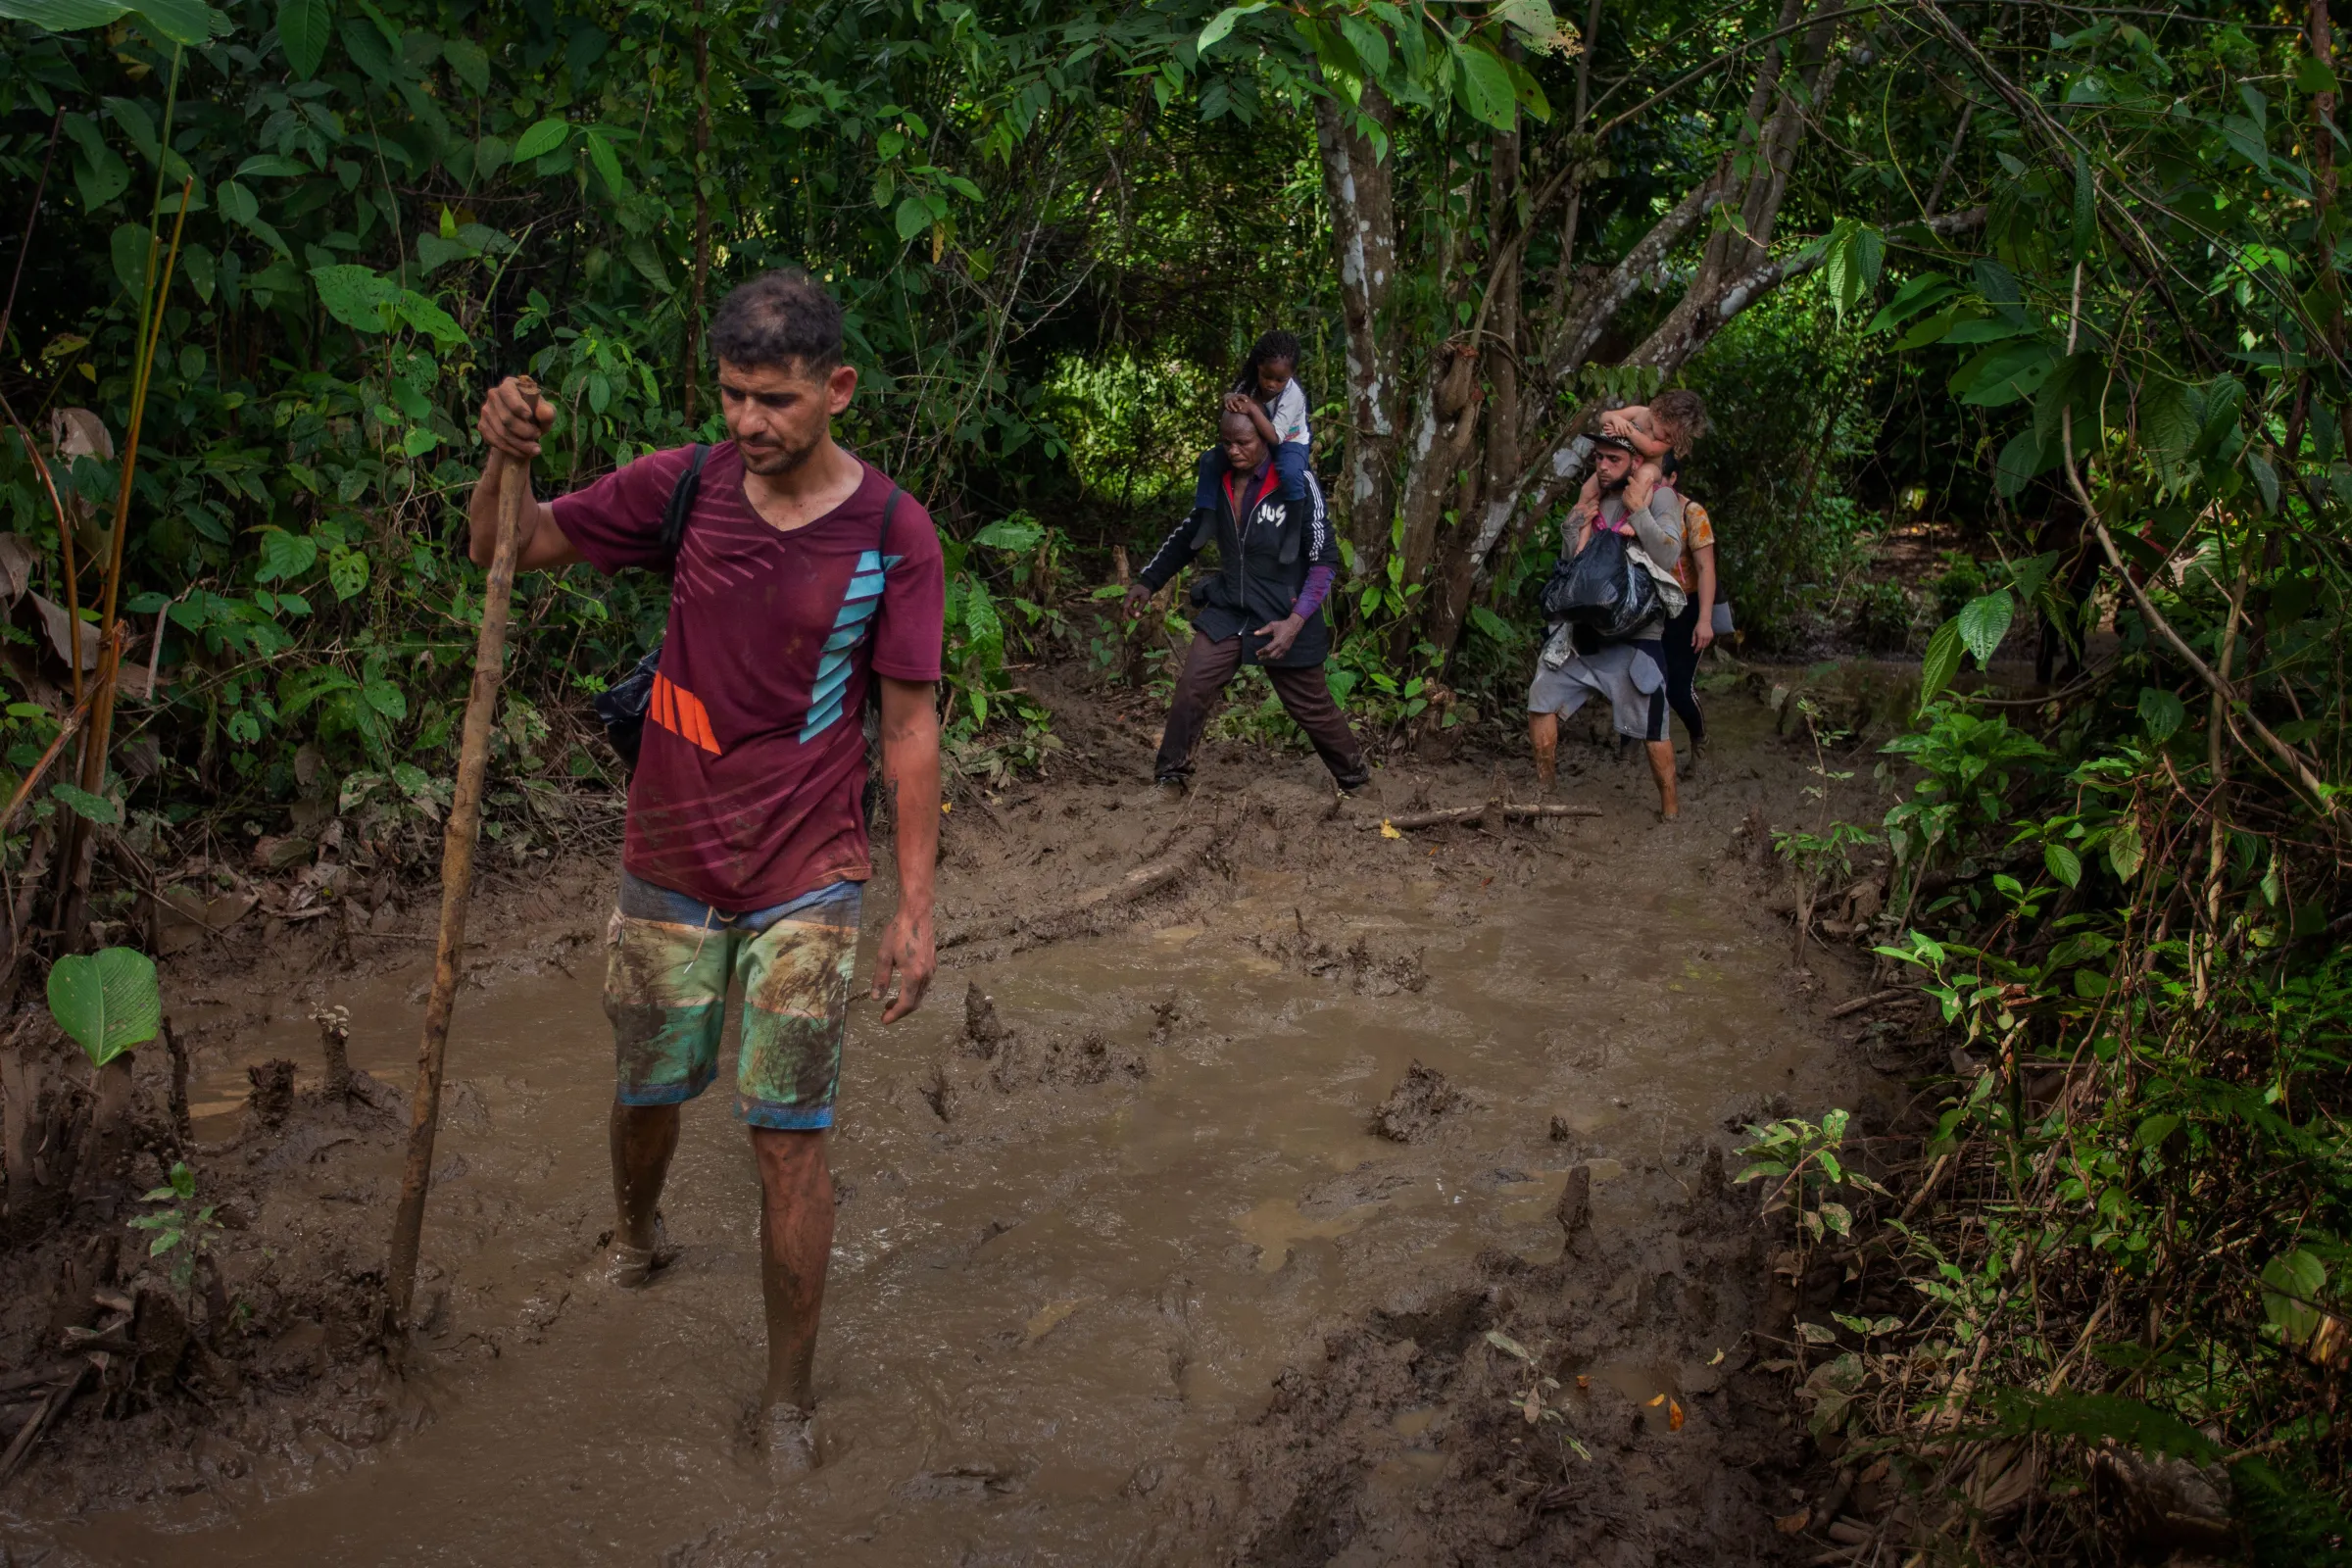 Migrants from Venezuela and African countries traverse dense jungle through the Darién Gap where people have died along the way and been targeted by attackers, according to aid groups. Darién Gap, Colombia July 27, 2022. Thomson Reuters Foundation/Fabio Cuttica